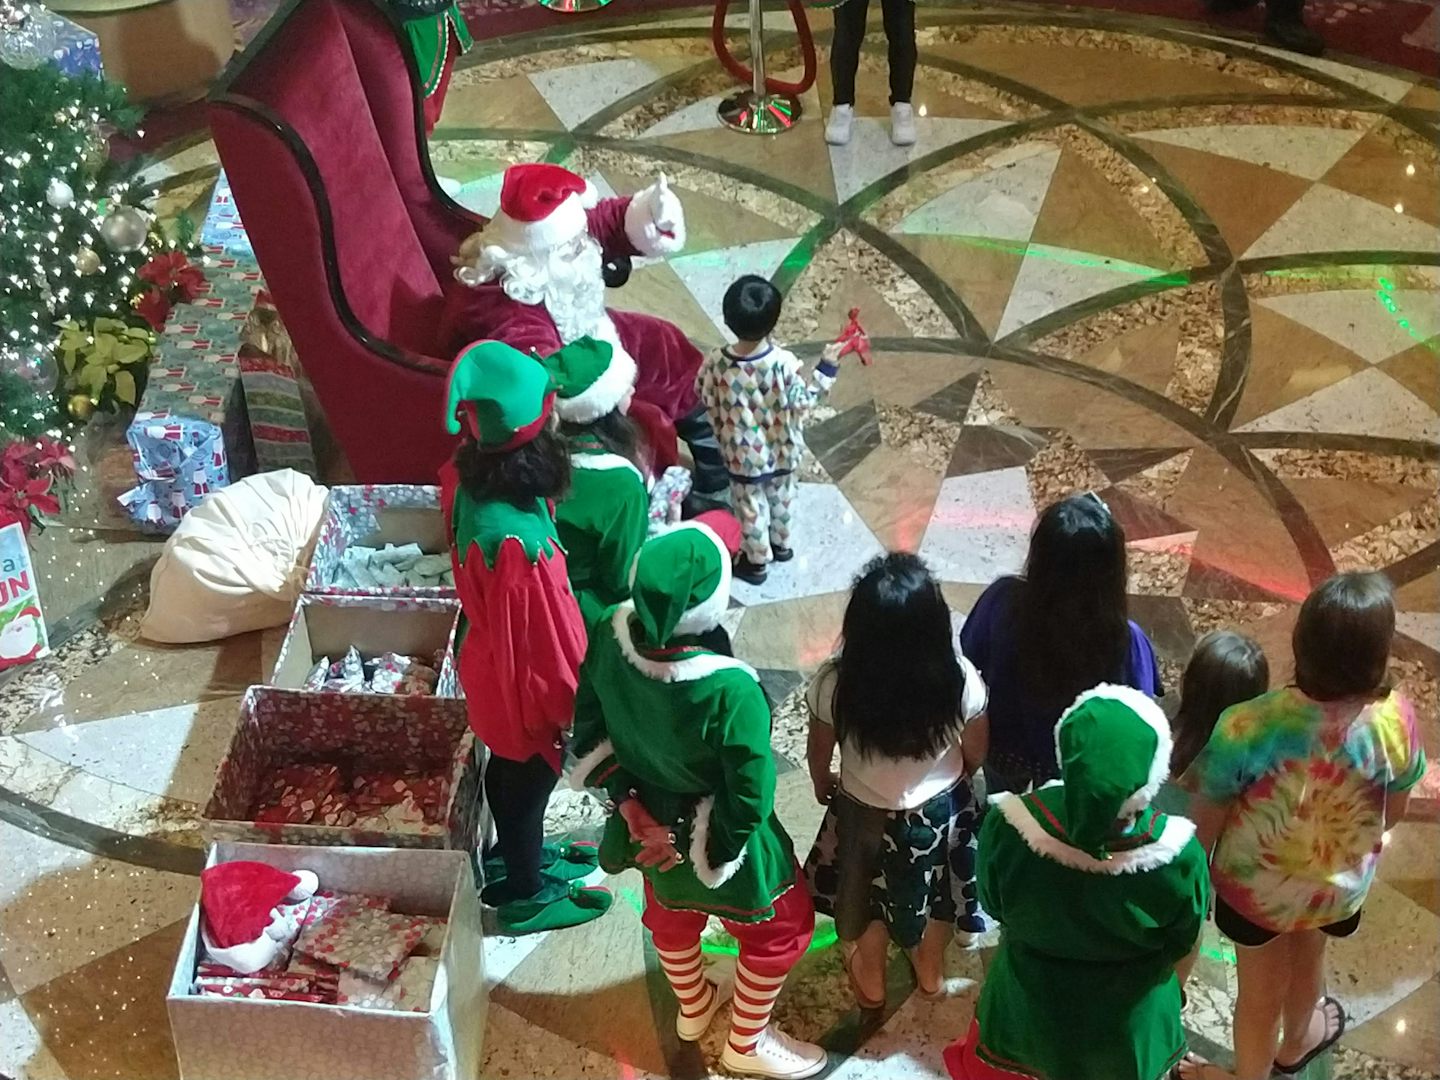 Santa and his elves gave presents to all the children